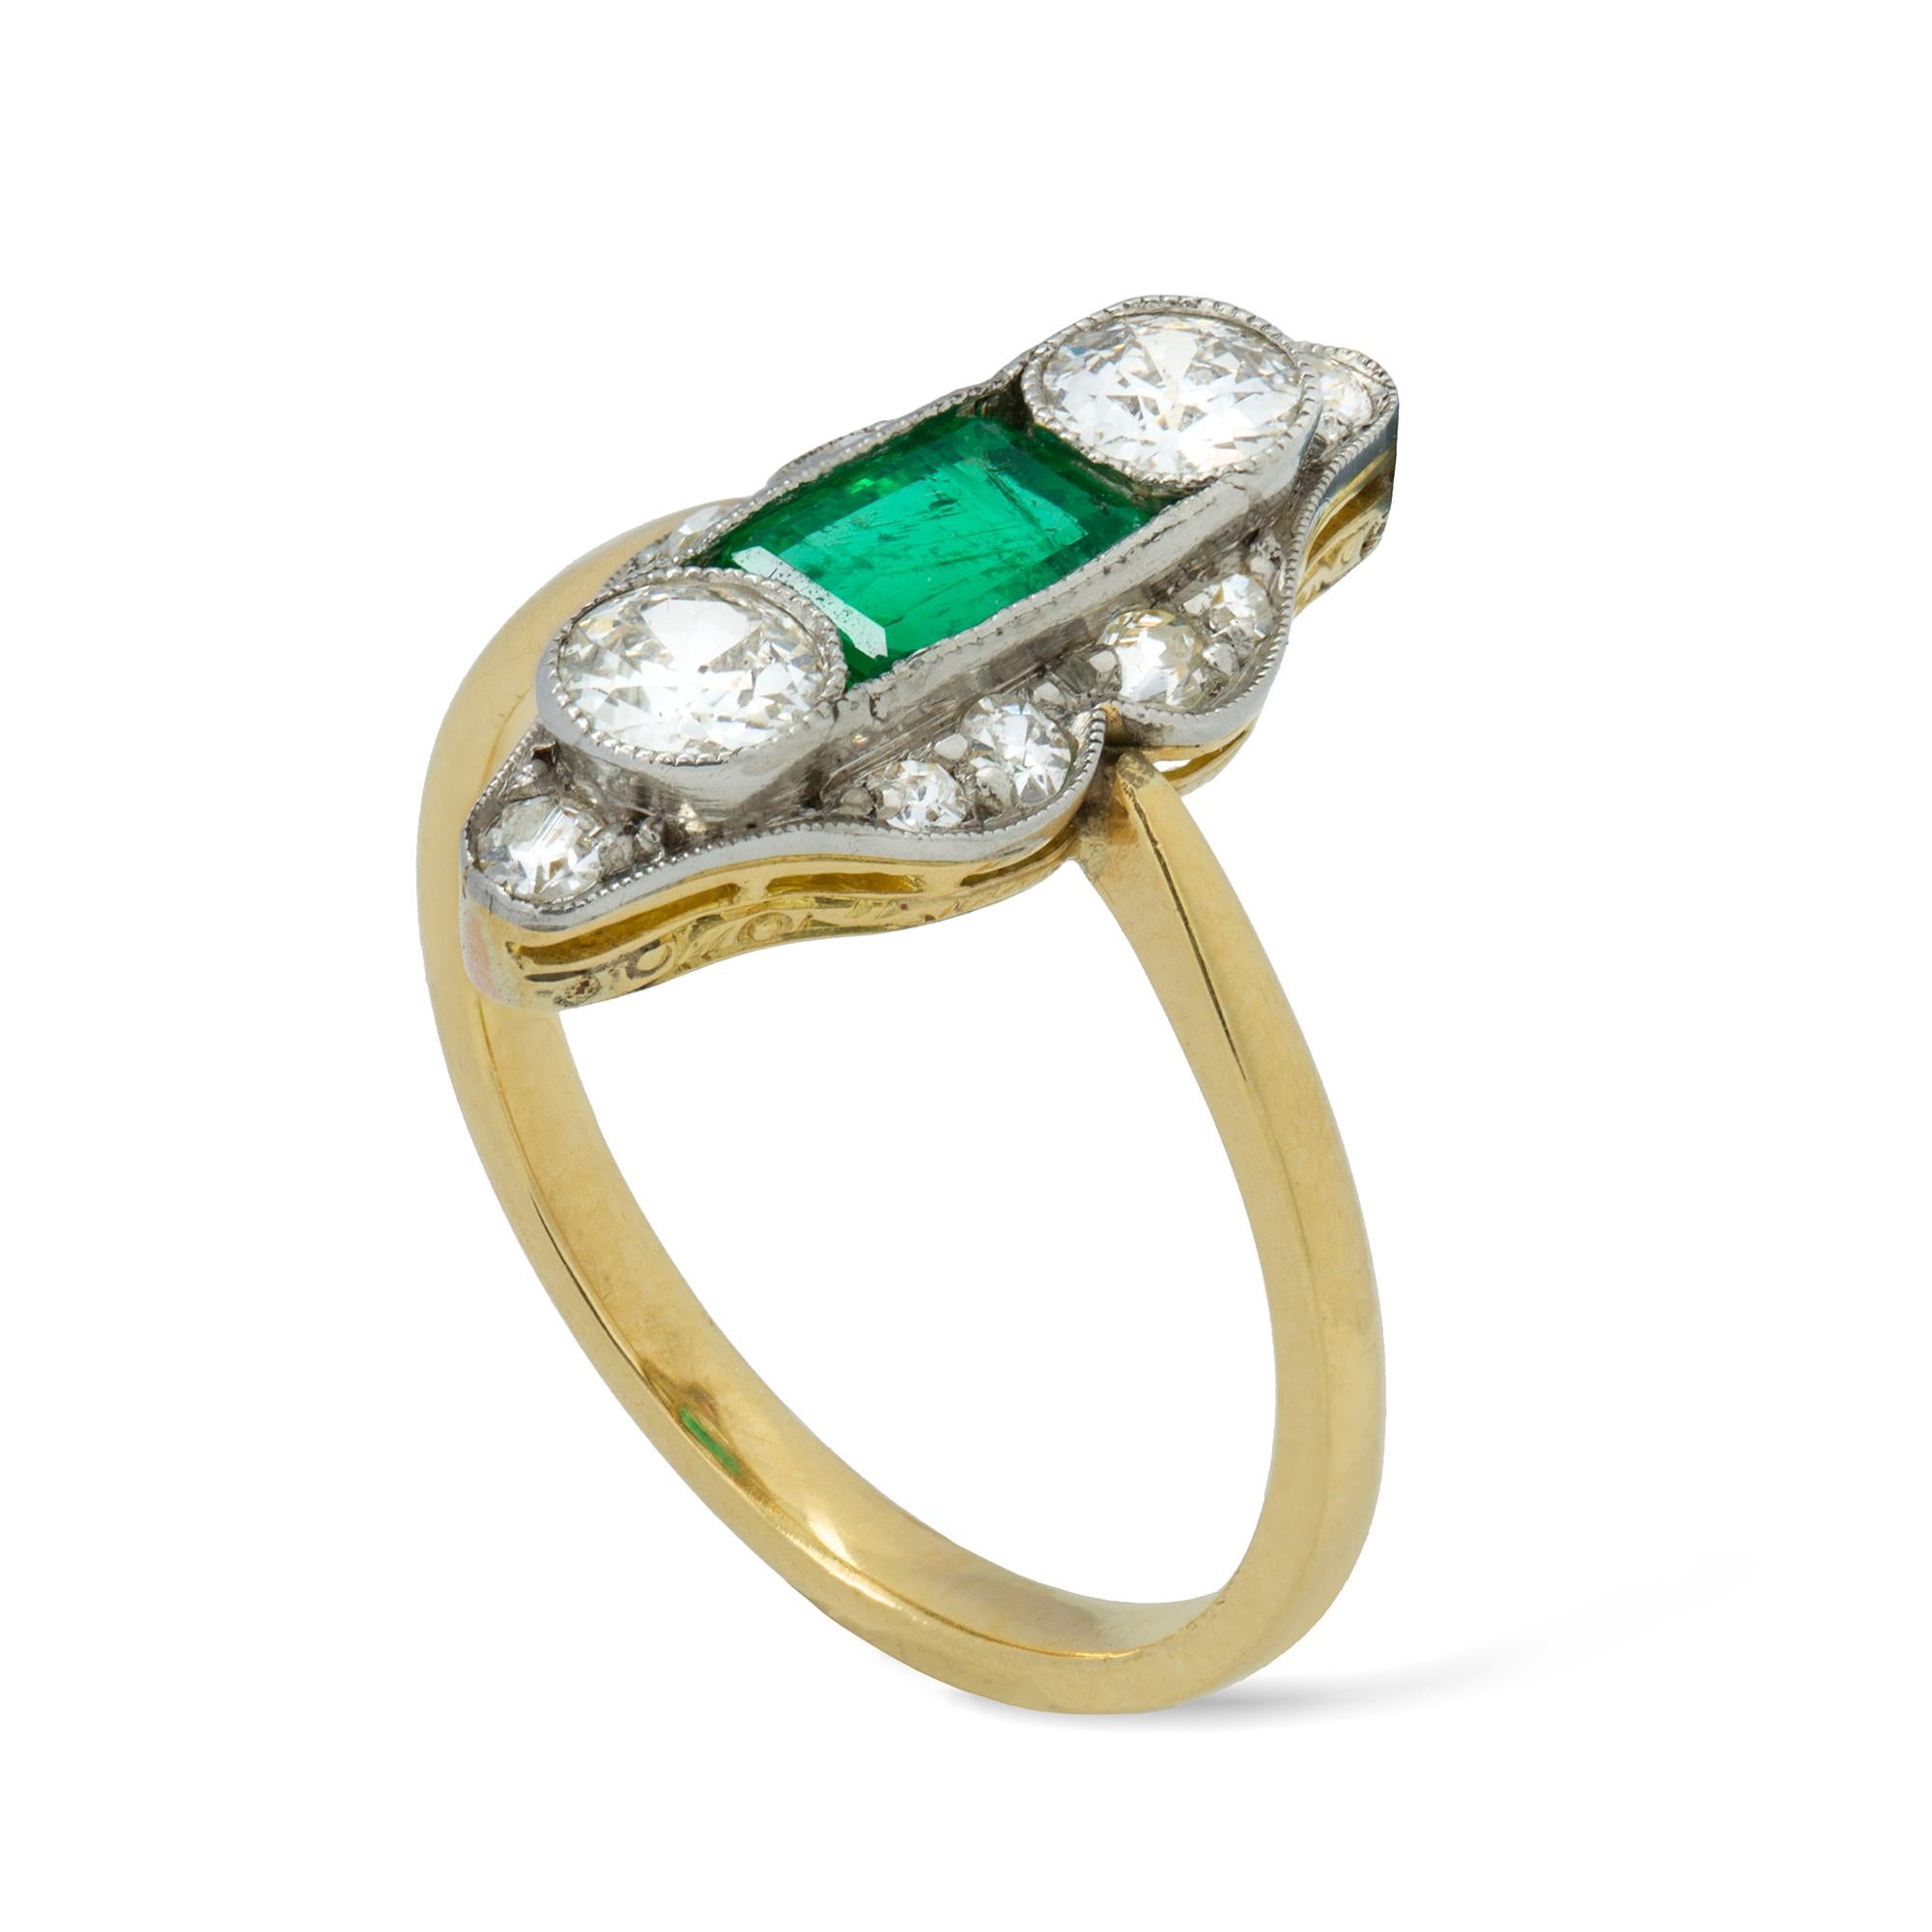 An Edwardian emerald and diamond ring, the rectangular-cut faceted emerald estimated to weigh 0.6 carats and vertically-set between two old European-cut diamonds estimated to weigh ¼ carat each, all surrounded by a navette-shaped frame encrusted